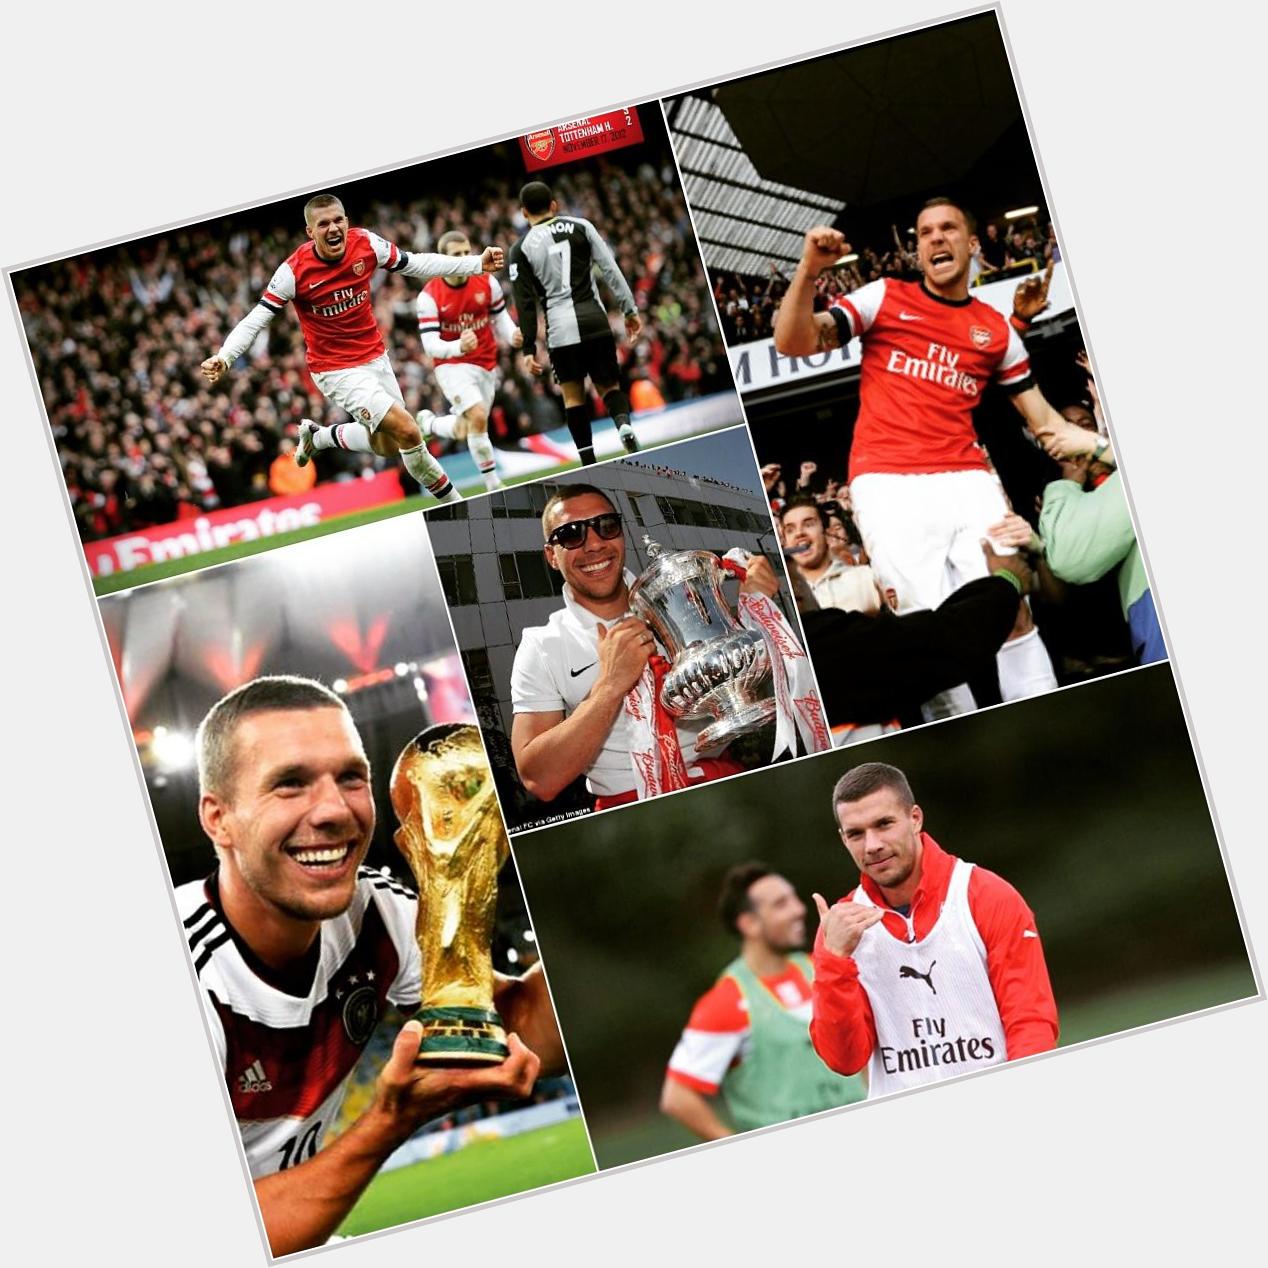 30? Thought he was an upcoming player \" Happy 30th Birthday, Lukas Podolski. 